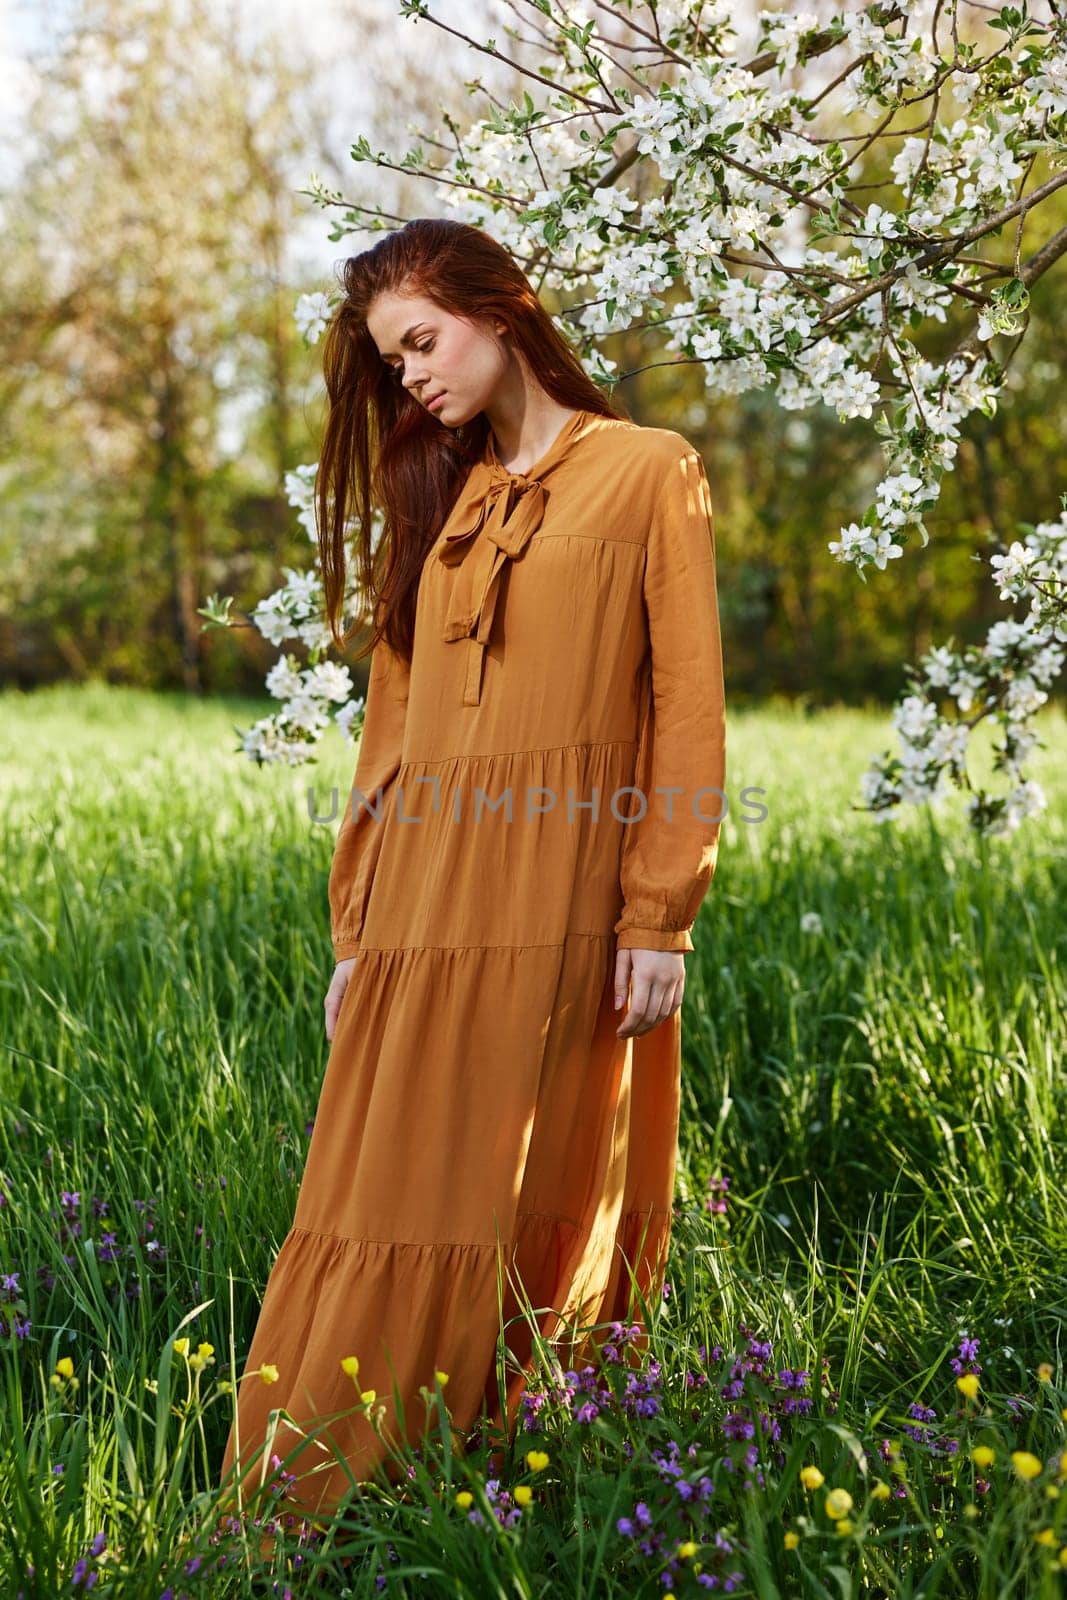 a slender, sweet woman stands in a long orange dress in the tall grass near a flowering tree and looks away, and her dress is developing in a light wind by Vichizh